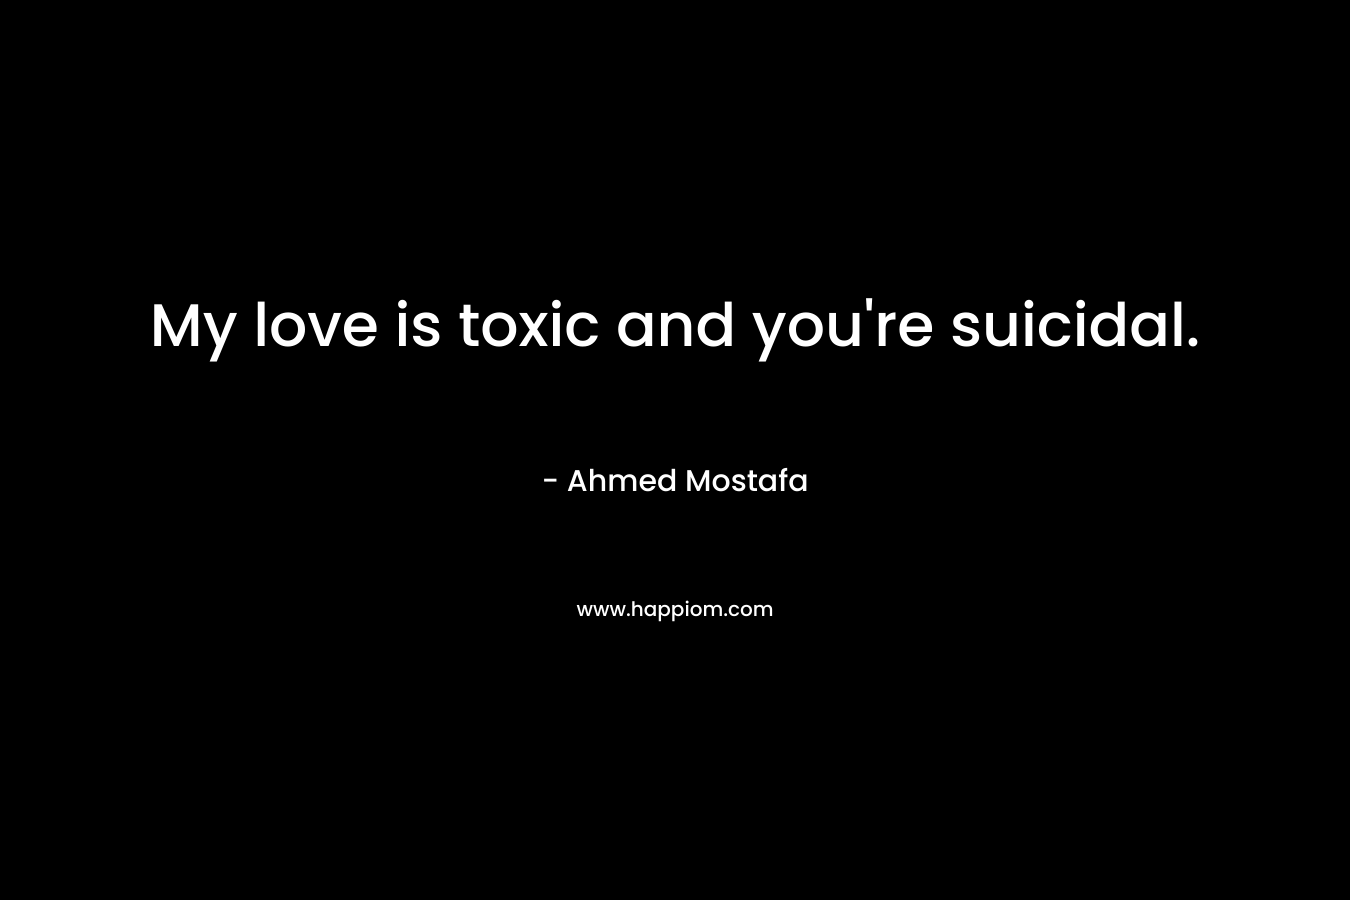 My love is toxic and you're suicidal.